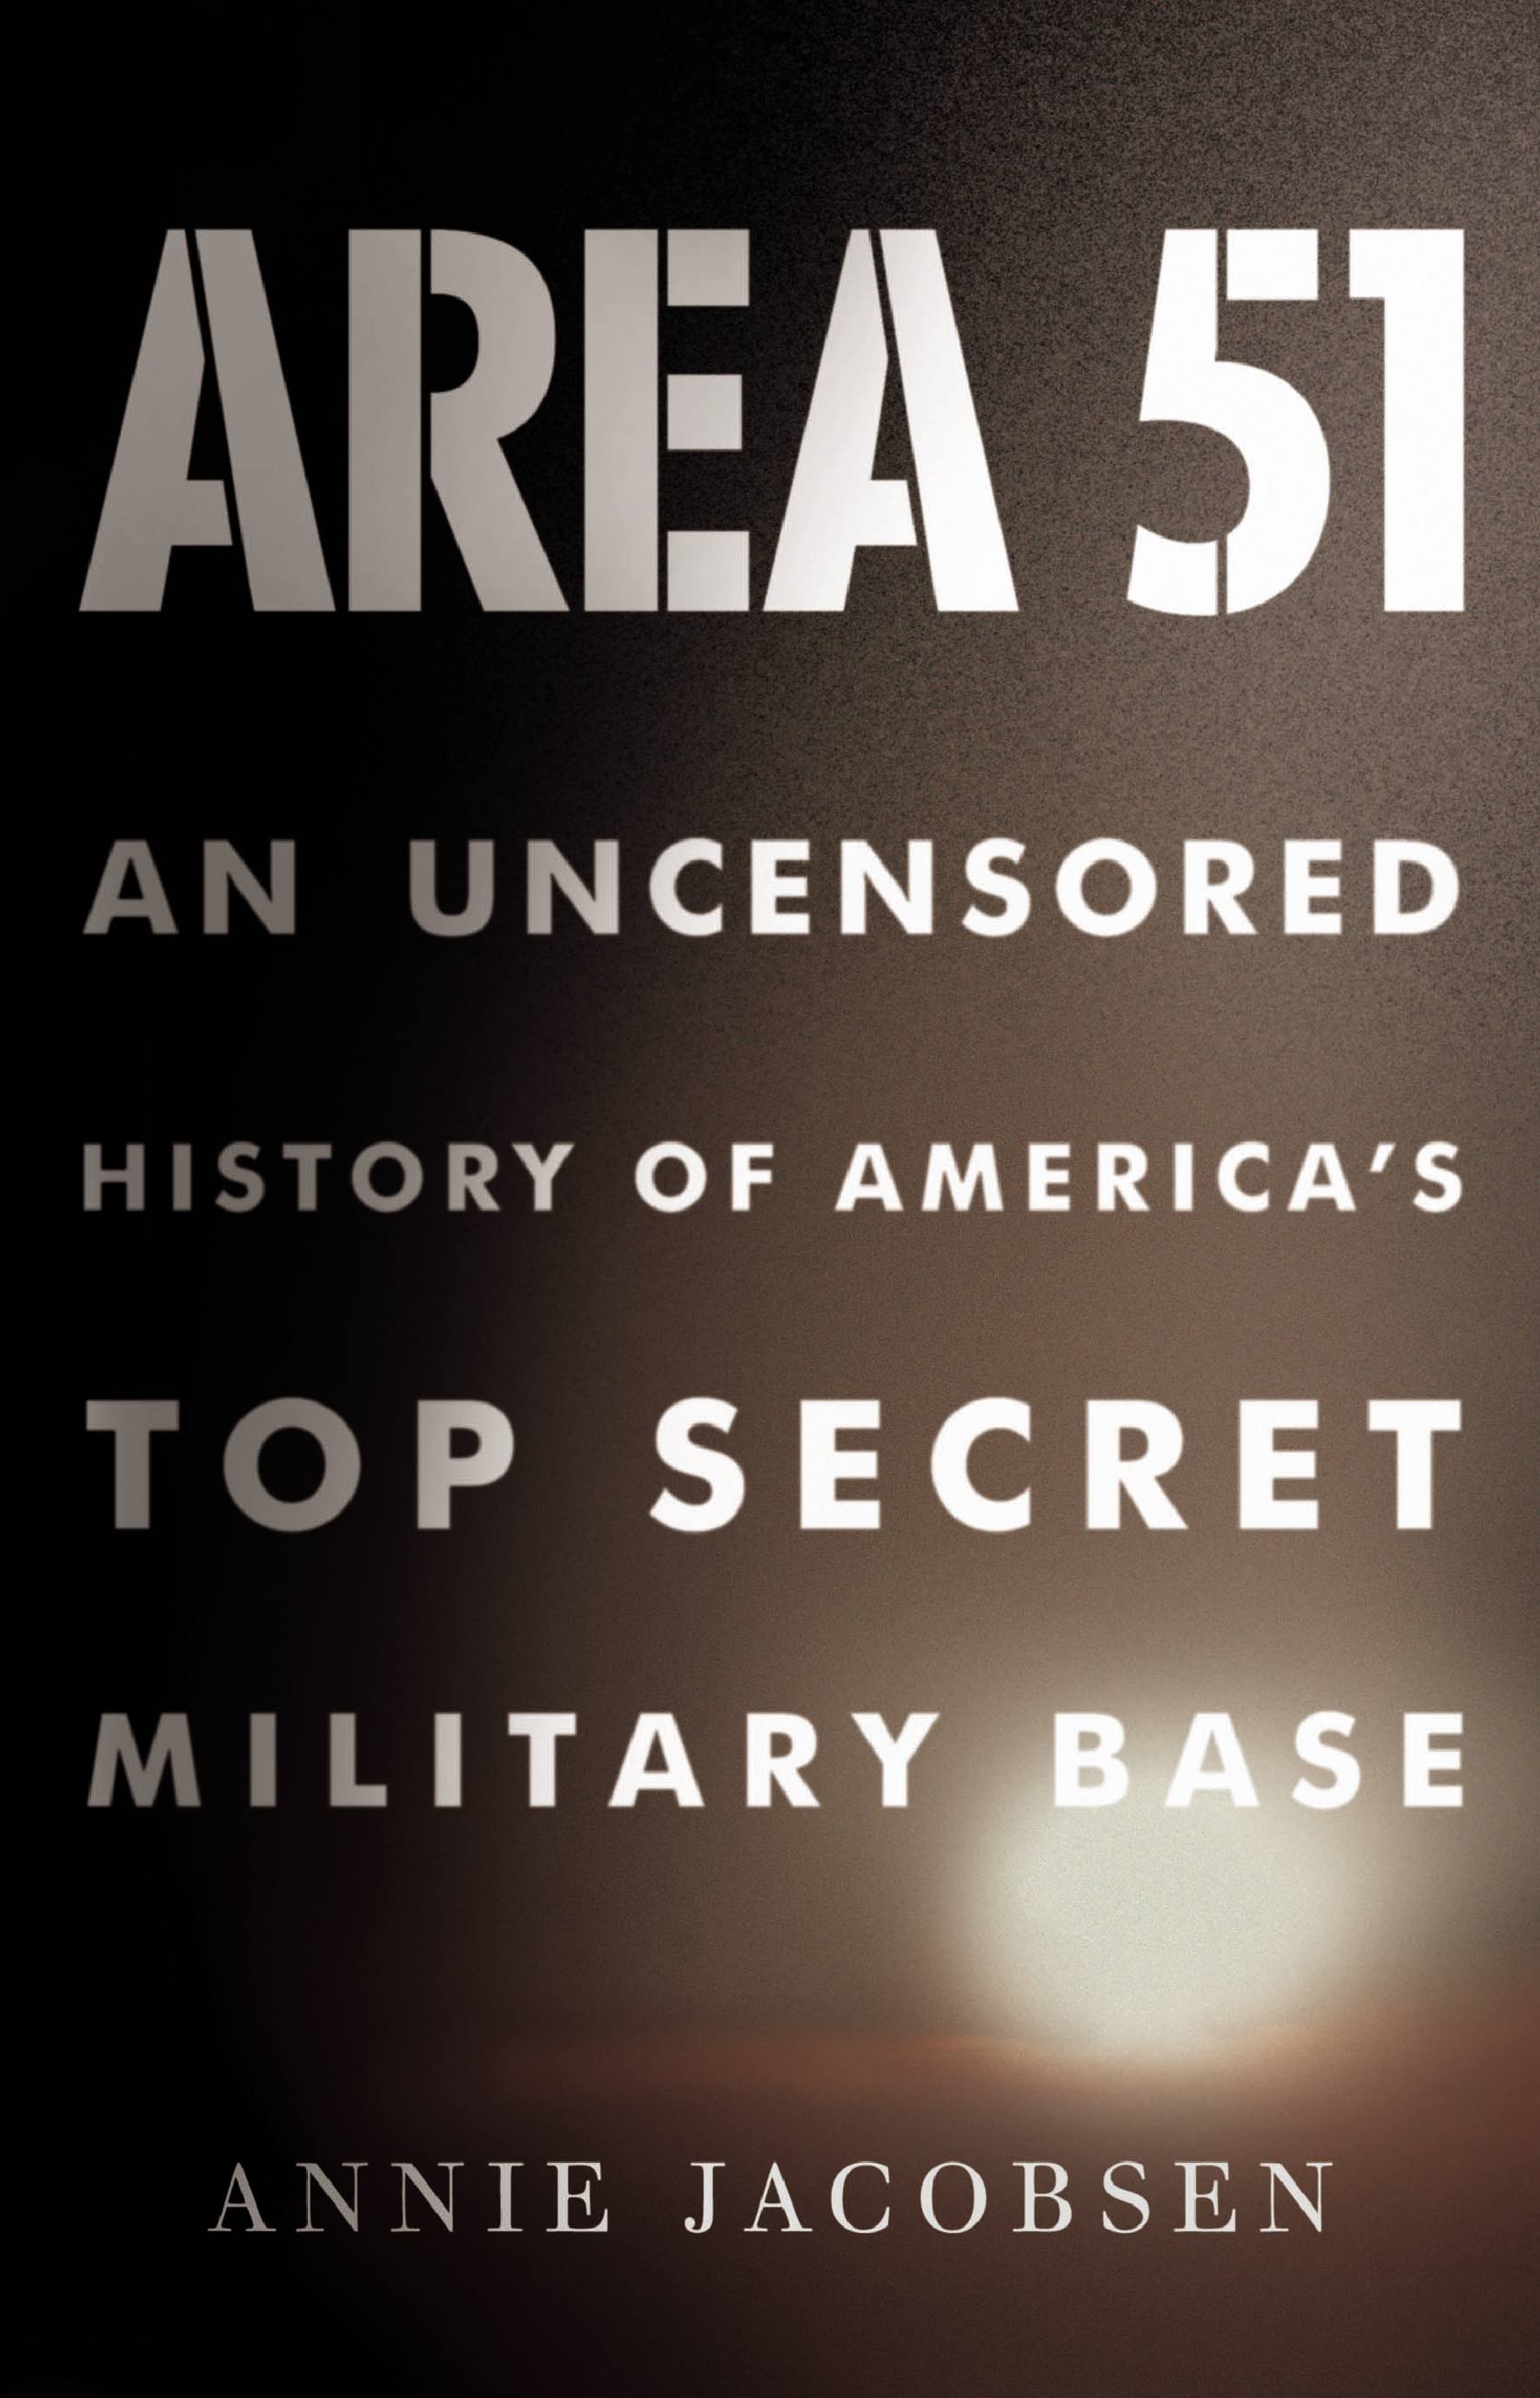 Cover image for Area 51 [electronic resource] : An Uncensored History of America's Top Secret Military Base